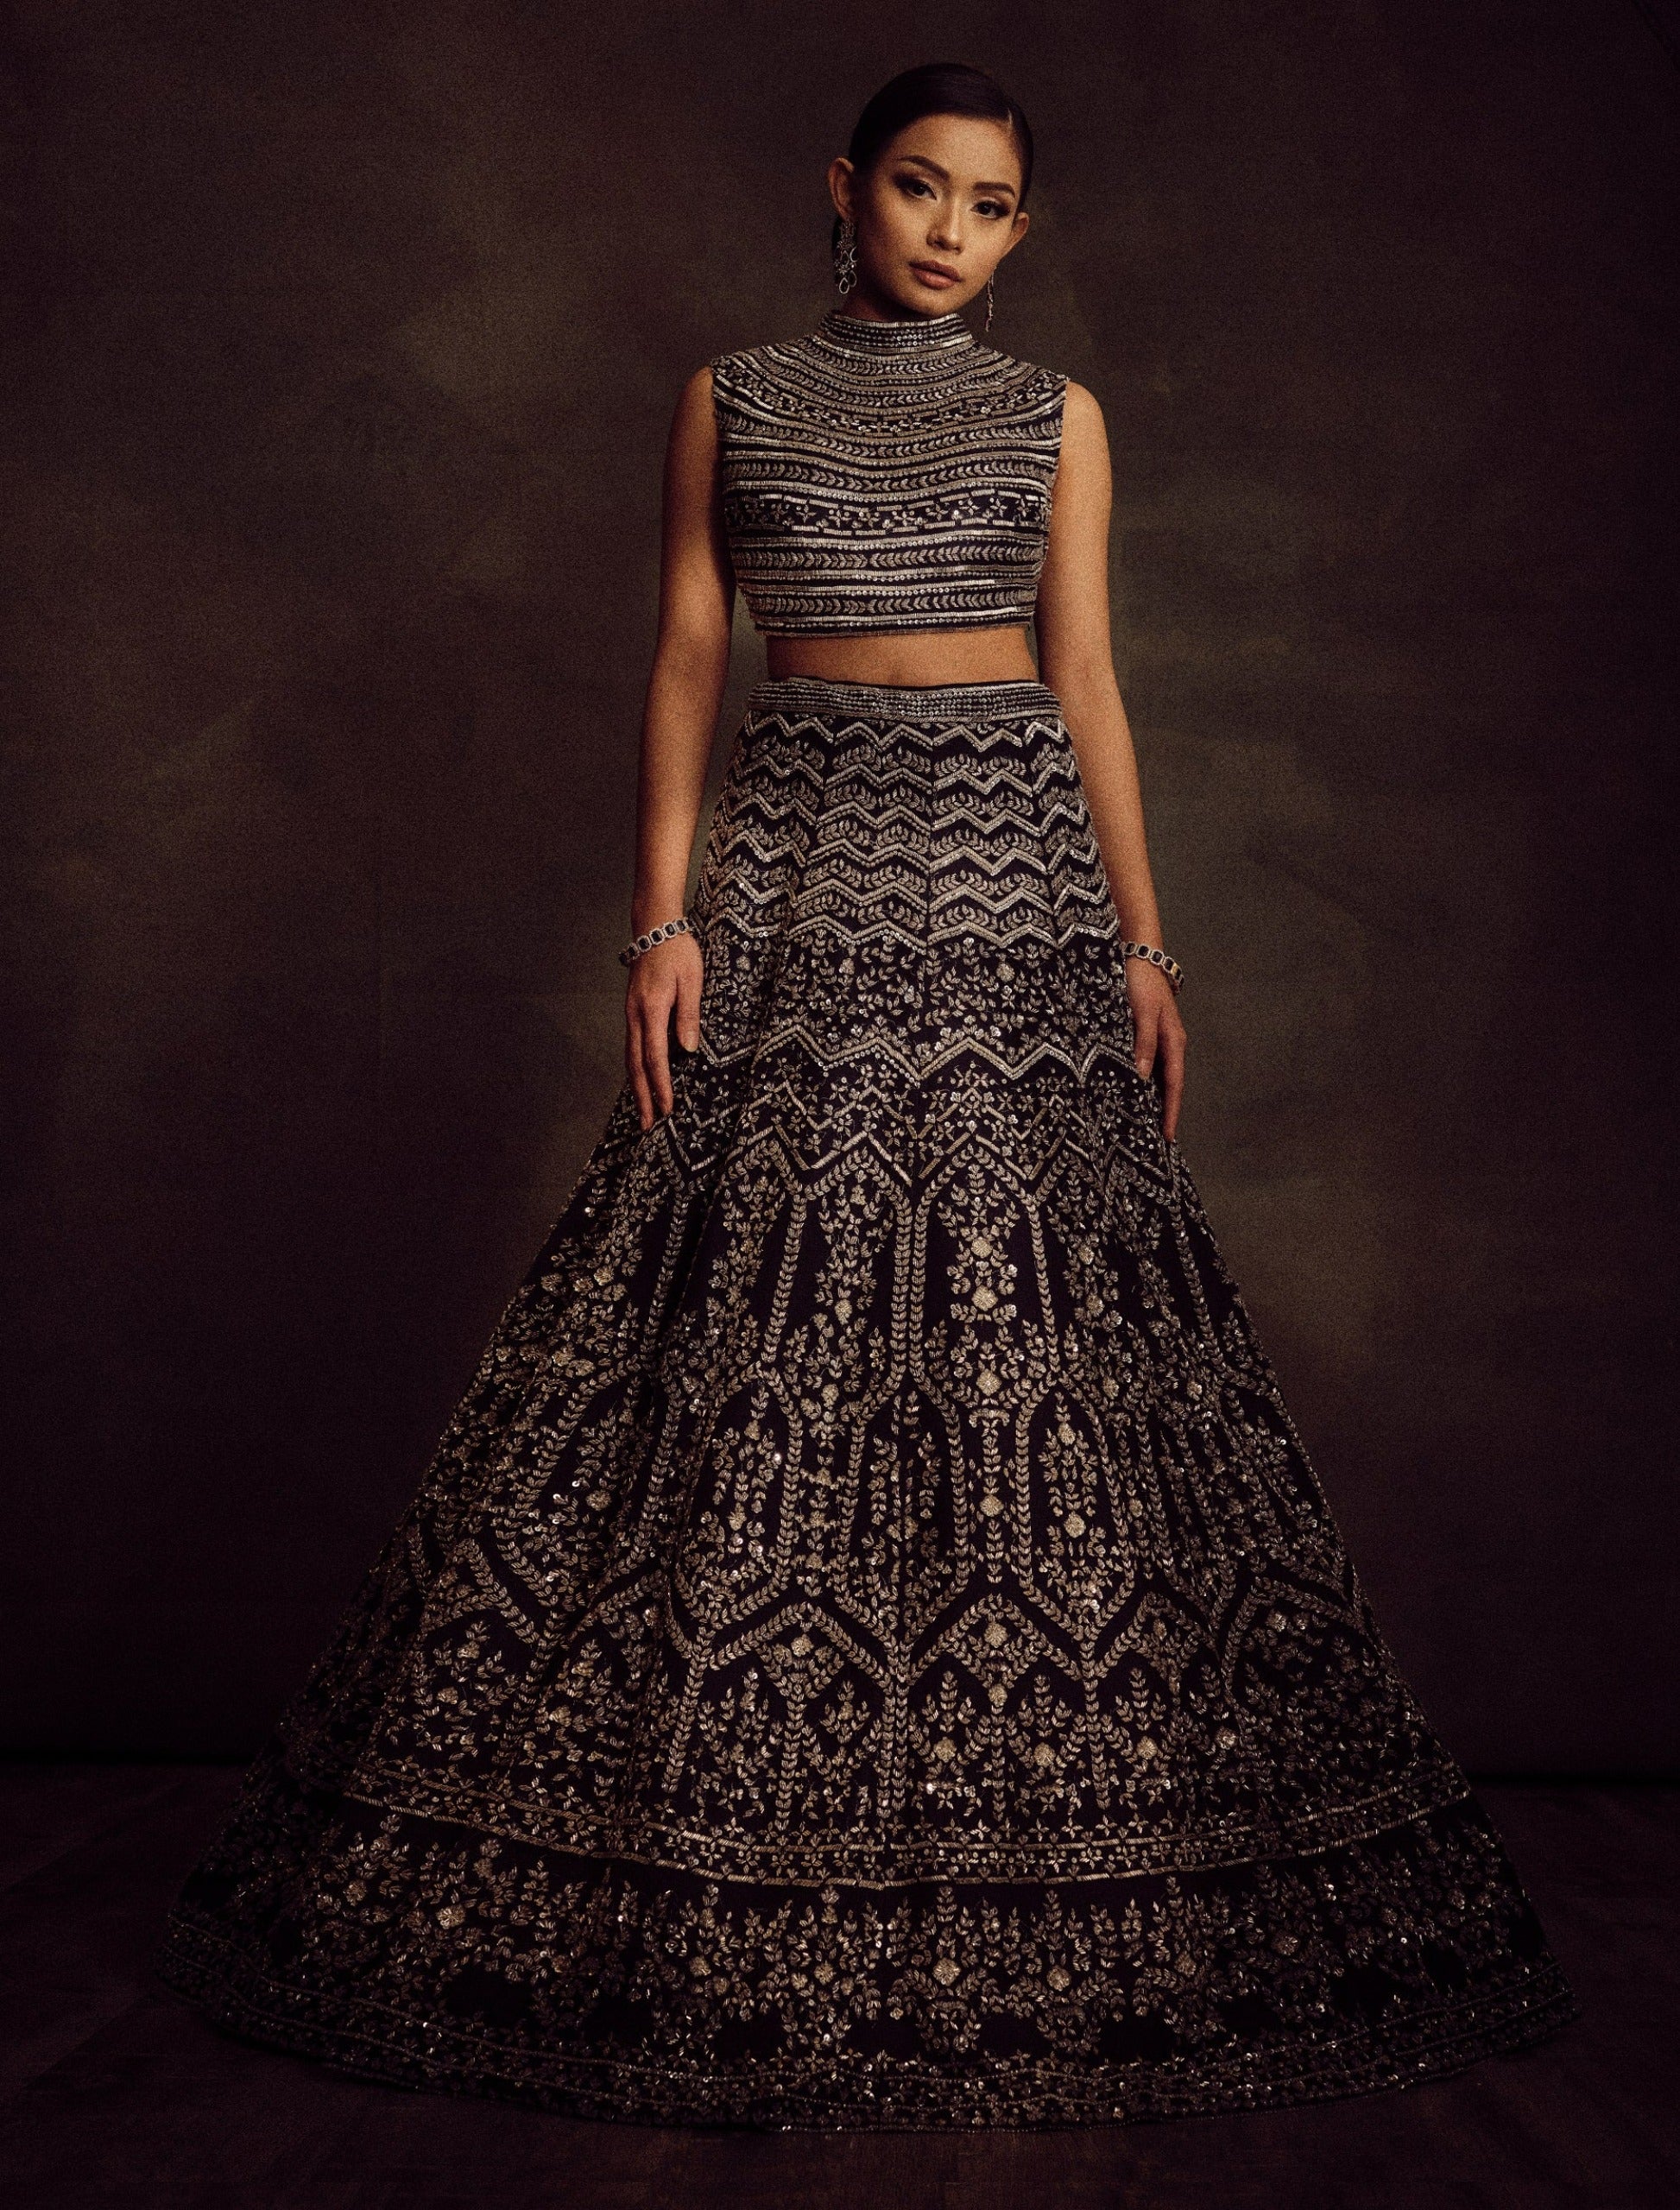 Well Groomed, Inc. can do no wrong! This emarald gown embodies all that is  opulent and royal! What a show-stopper! | Indian look, Indian bridal wear,  Choli designs